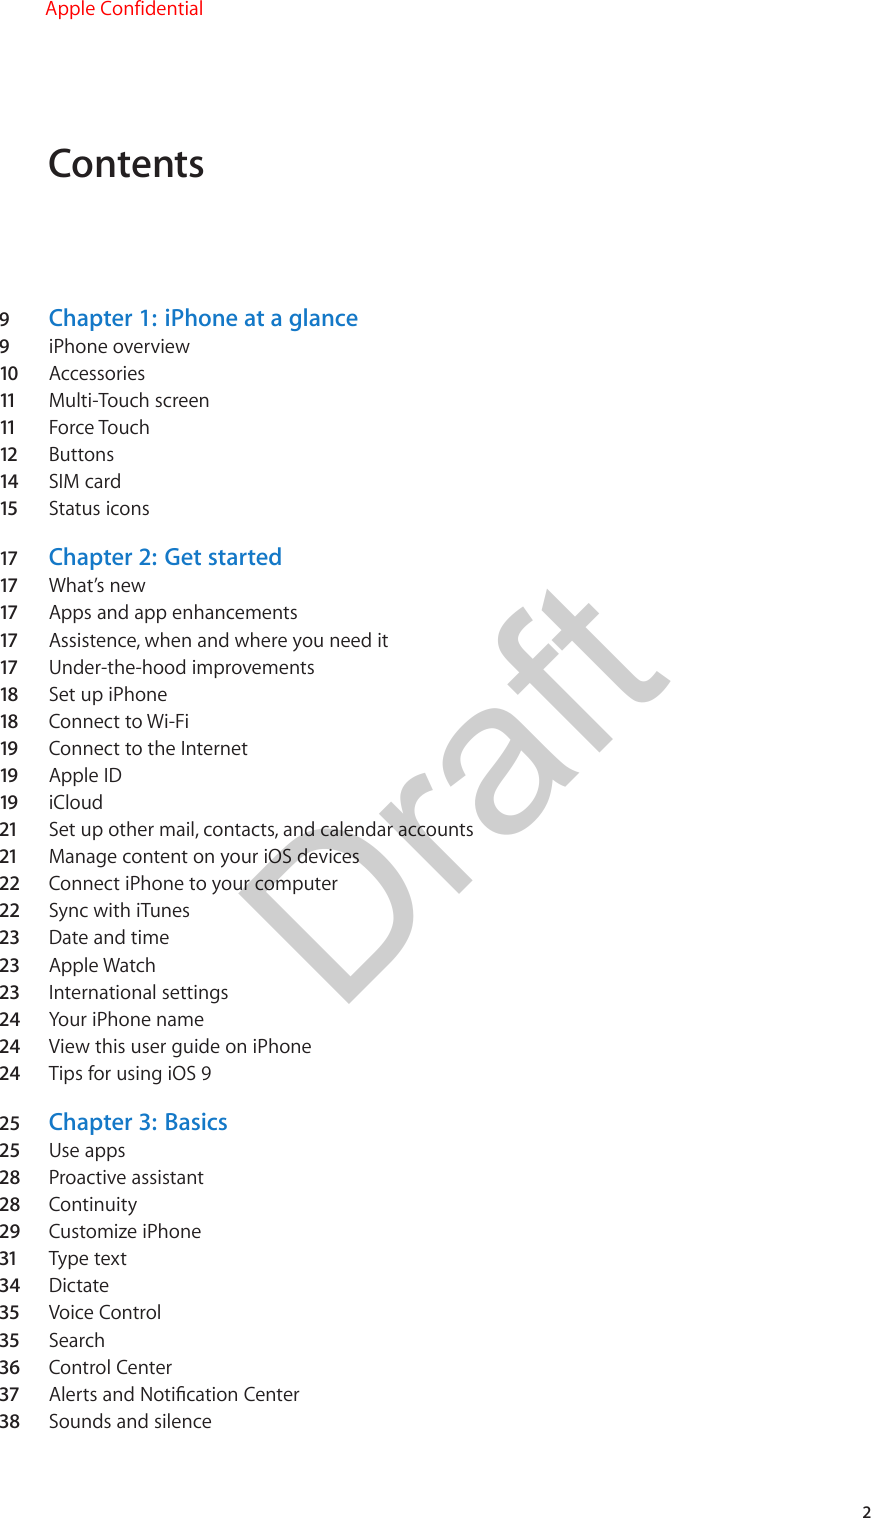 Contents9  Chapter 1:  iPhone at a glance9  iPhone overview10  Accessories11   Multi-Touch screen11   Force Touch12  Buttons14  SIM card15  Status icons17  Chapter 2:  Get started17  What’s new17  Apps and app enhancements17  Assistence, when and where you need it17  Under-the-hood improvements18  Set up iPhone18  Connect to Wi-Fi19  Connect to the Internet19  Apple ID19  iCloud21  Set up other mail, contacts, and calendar accounts21  Manage content on your iOS devices22  Connect iPhone to your computer22  Sync with iTunes23  Date and time23  Apple Watch23  International settings24  Your iPhone name24  View this user guide on iPhone24  Tips for using iOS 925  Chapter 3:  Basics25  Use apps28  Proactive assistant28  Continuity29  Customize iPhone31  Type text34  Dictate35  Voice Control35  Search36  Control Center37  Alerts and Notication Center38  Sounds and silence2Apple ConfidentialDraft